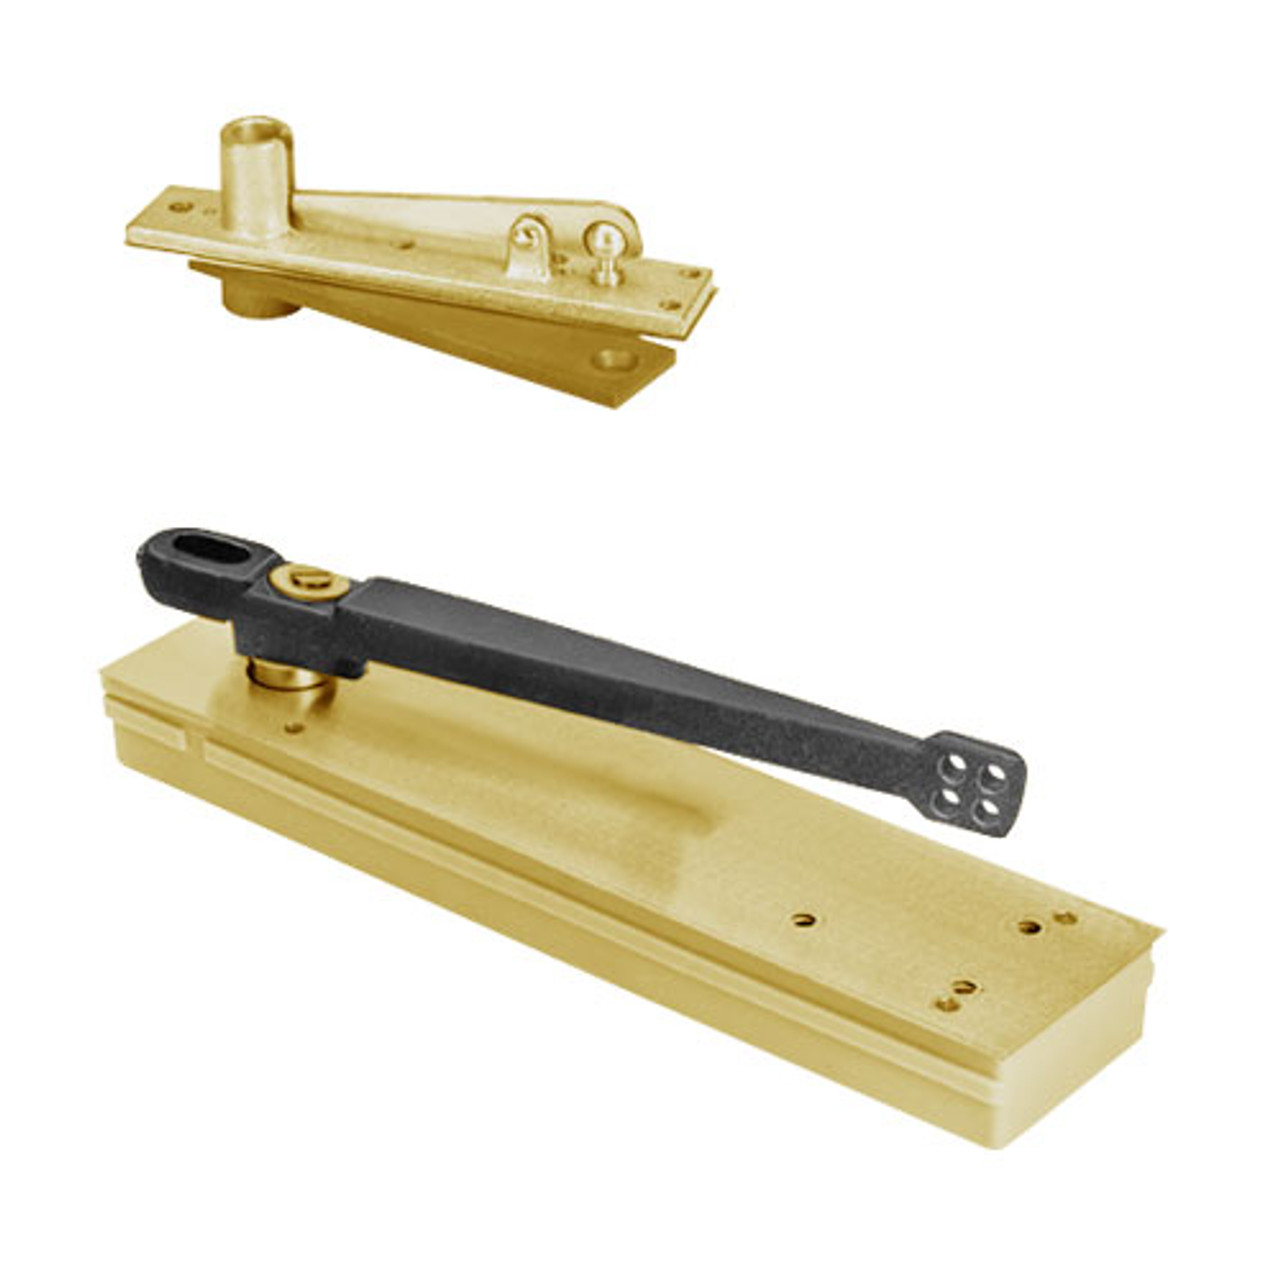 5013ABC90-LH-606 Rixson 50 Series Single Acting Center Hung Shallow Depth Floor Closers in Satin Brass Finish